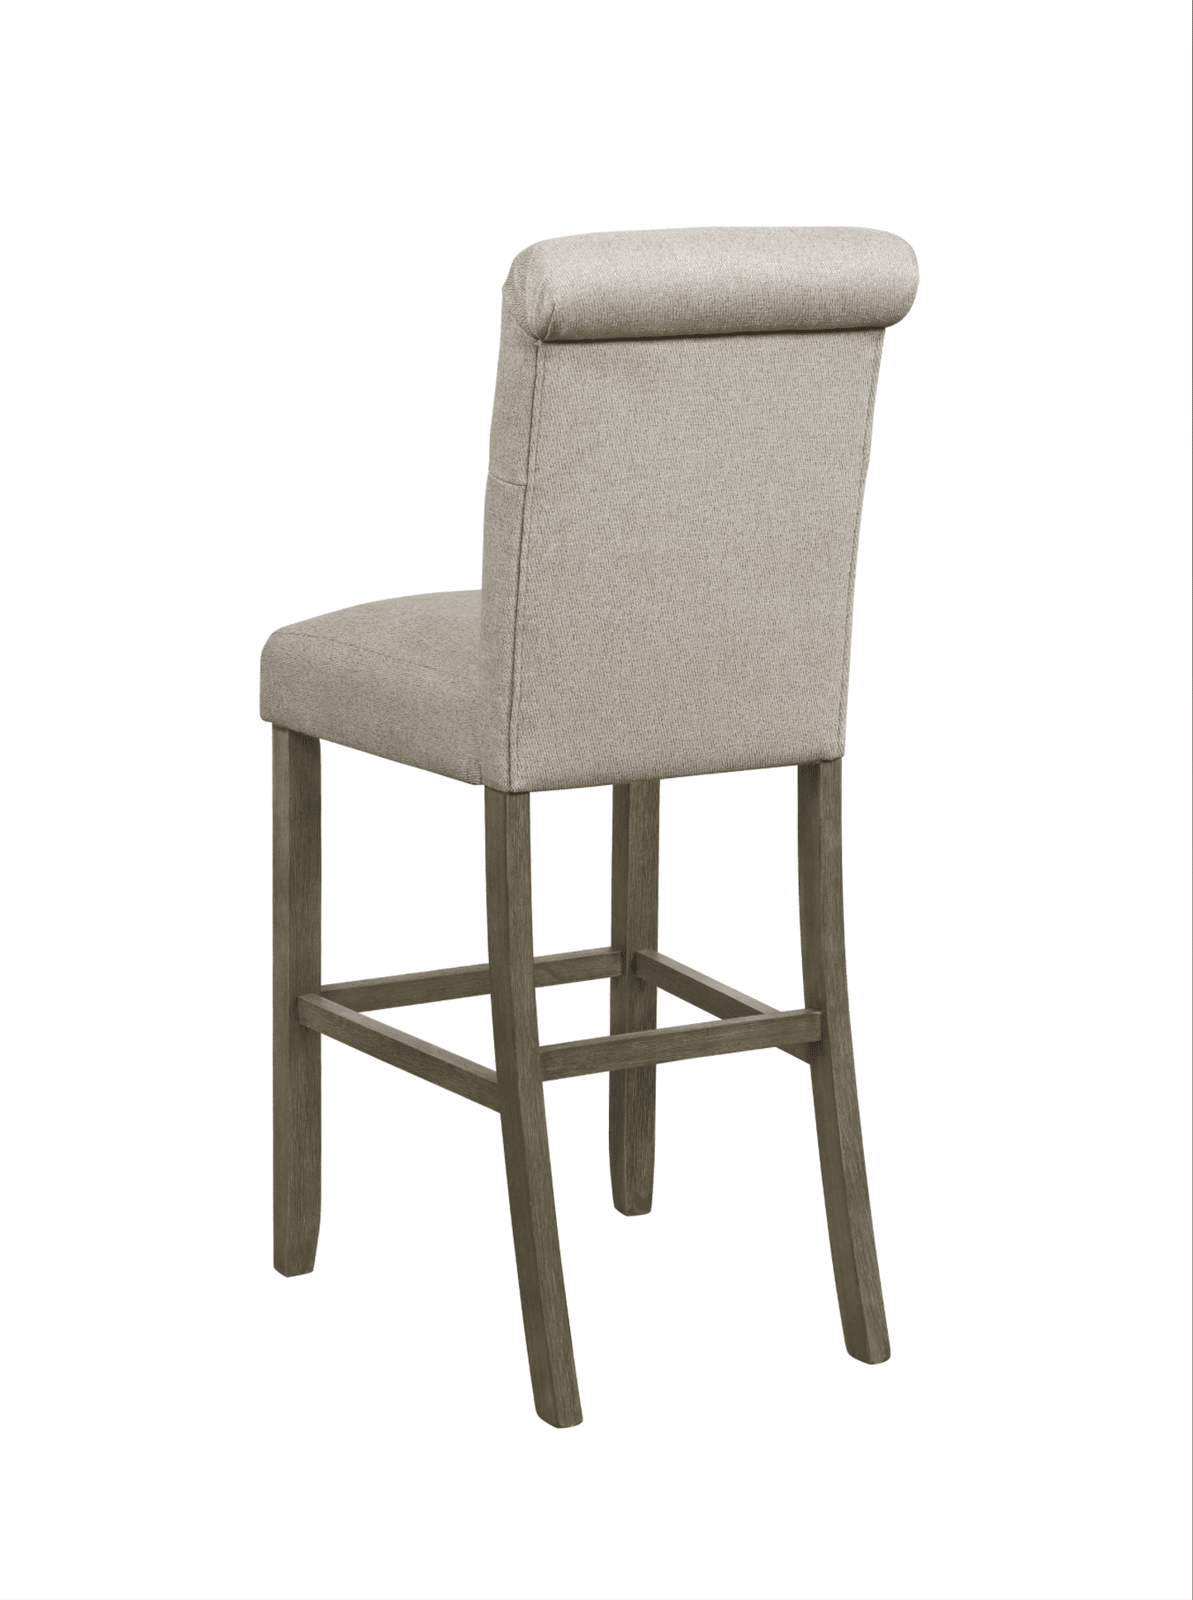 Calandra Tufted Back Bar Stools Rustic Brown And Beige Set Of 2